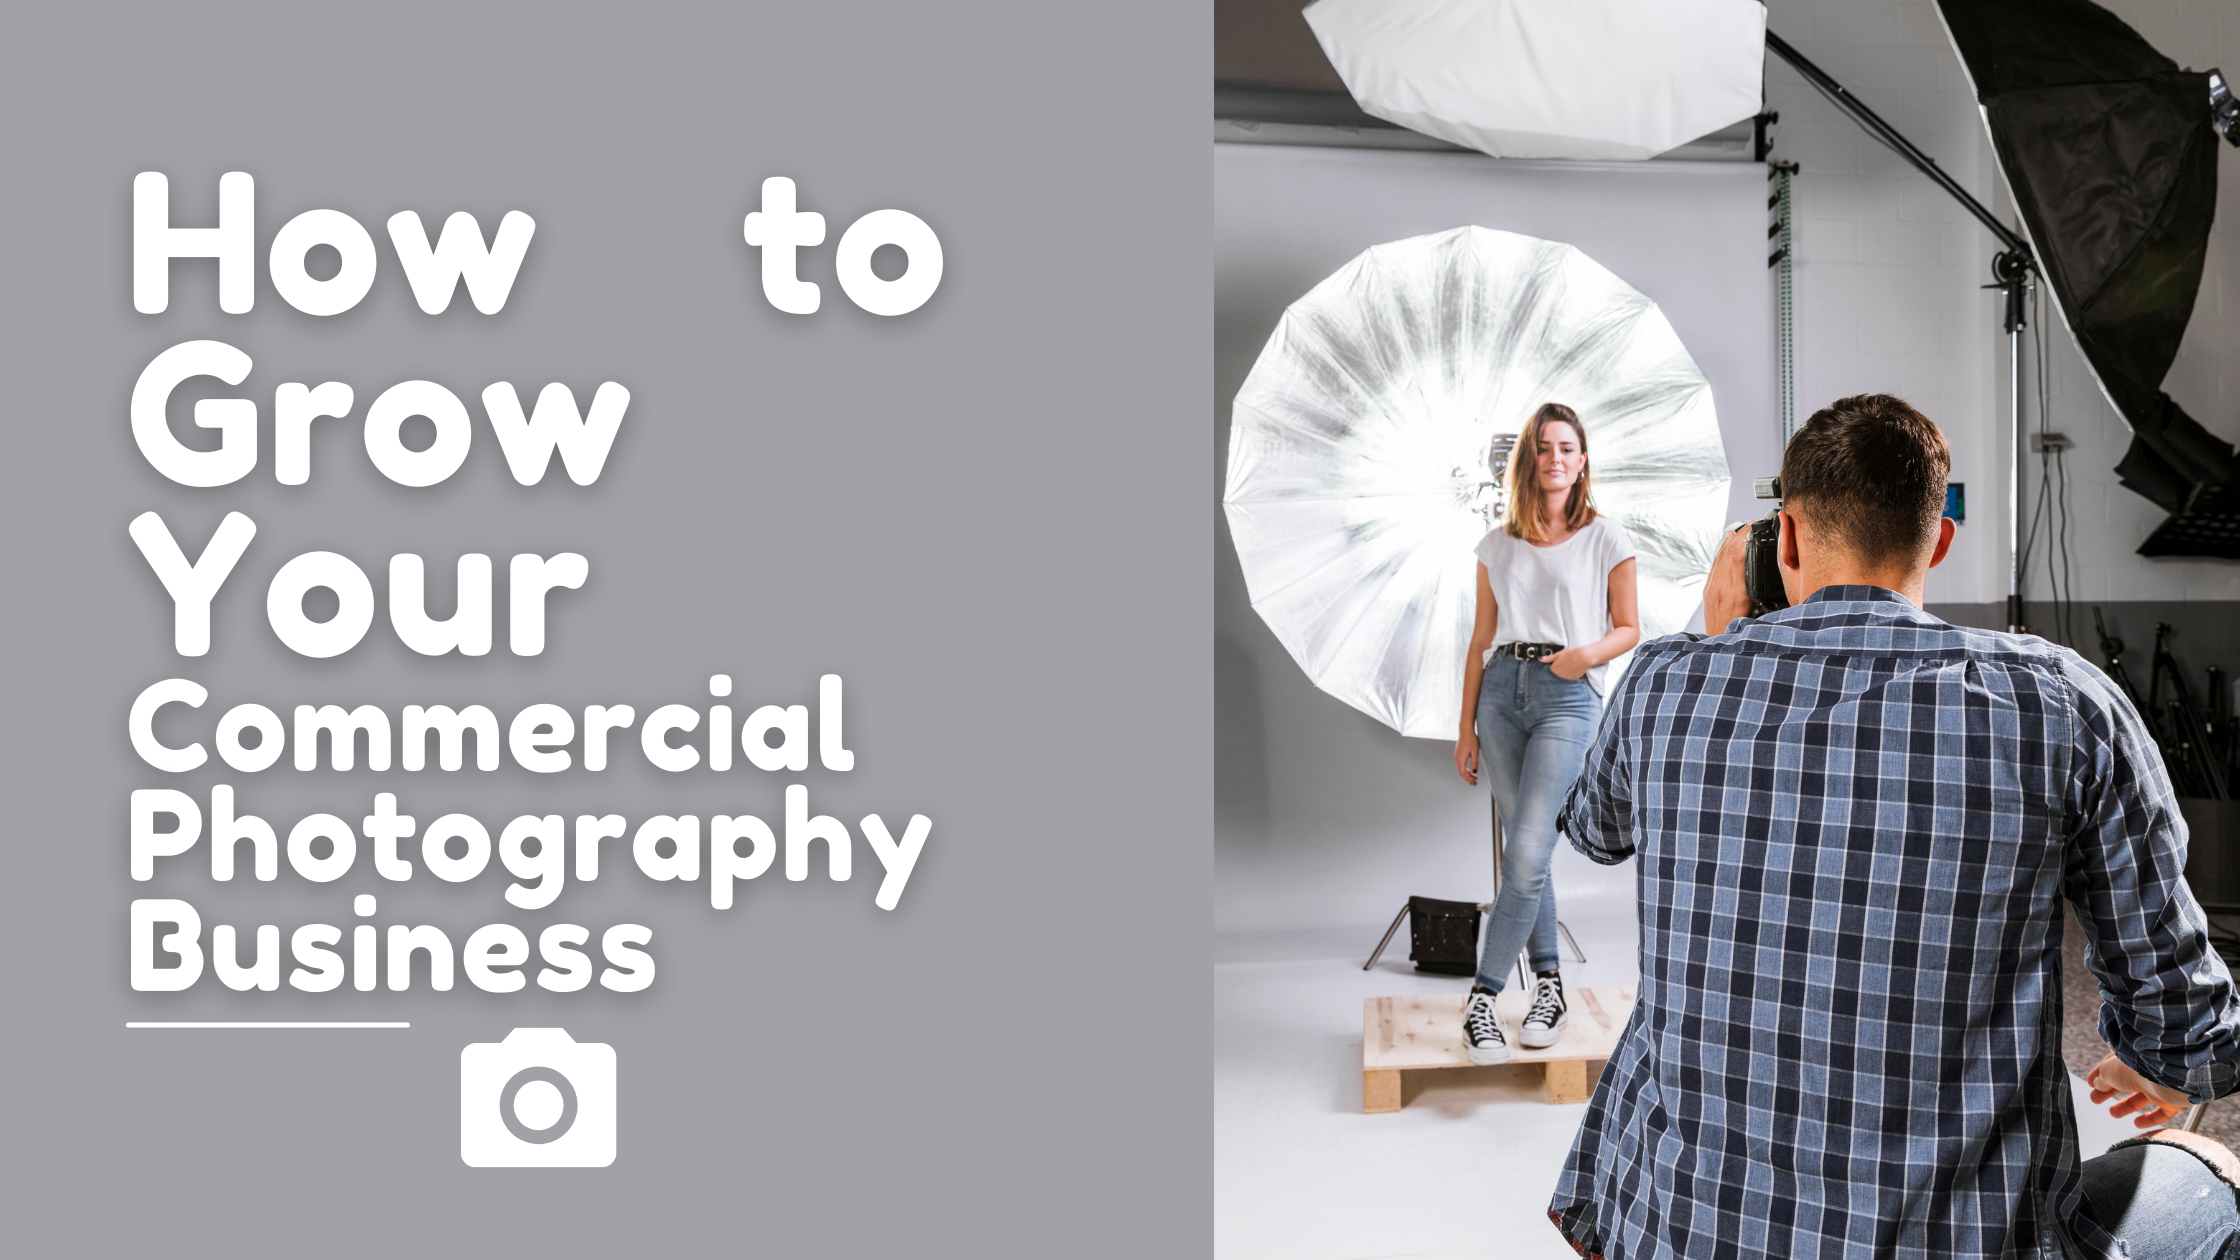 How to Grow Your Commercial Photography Business